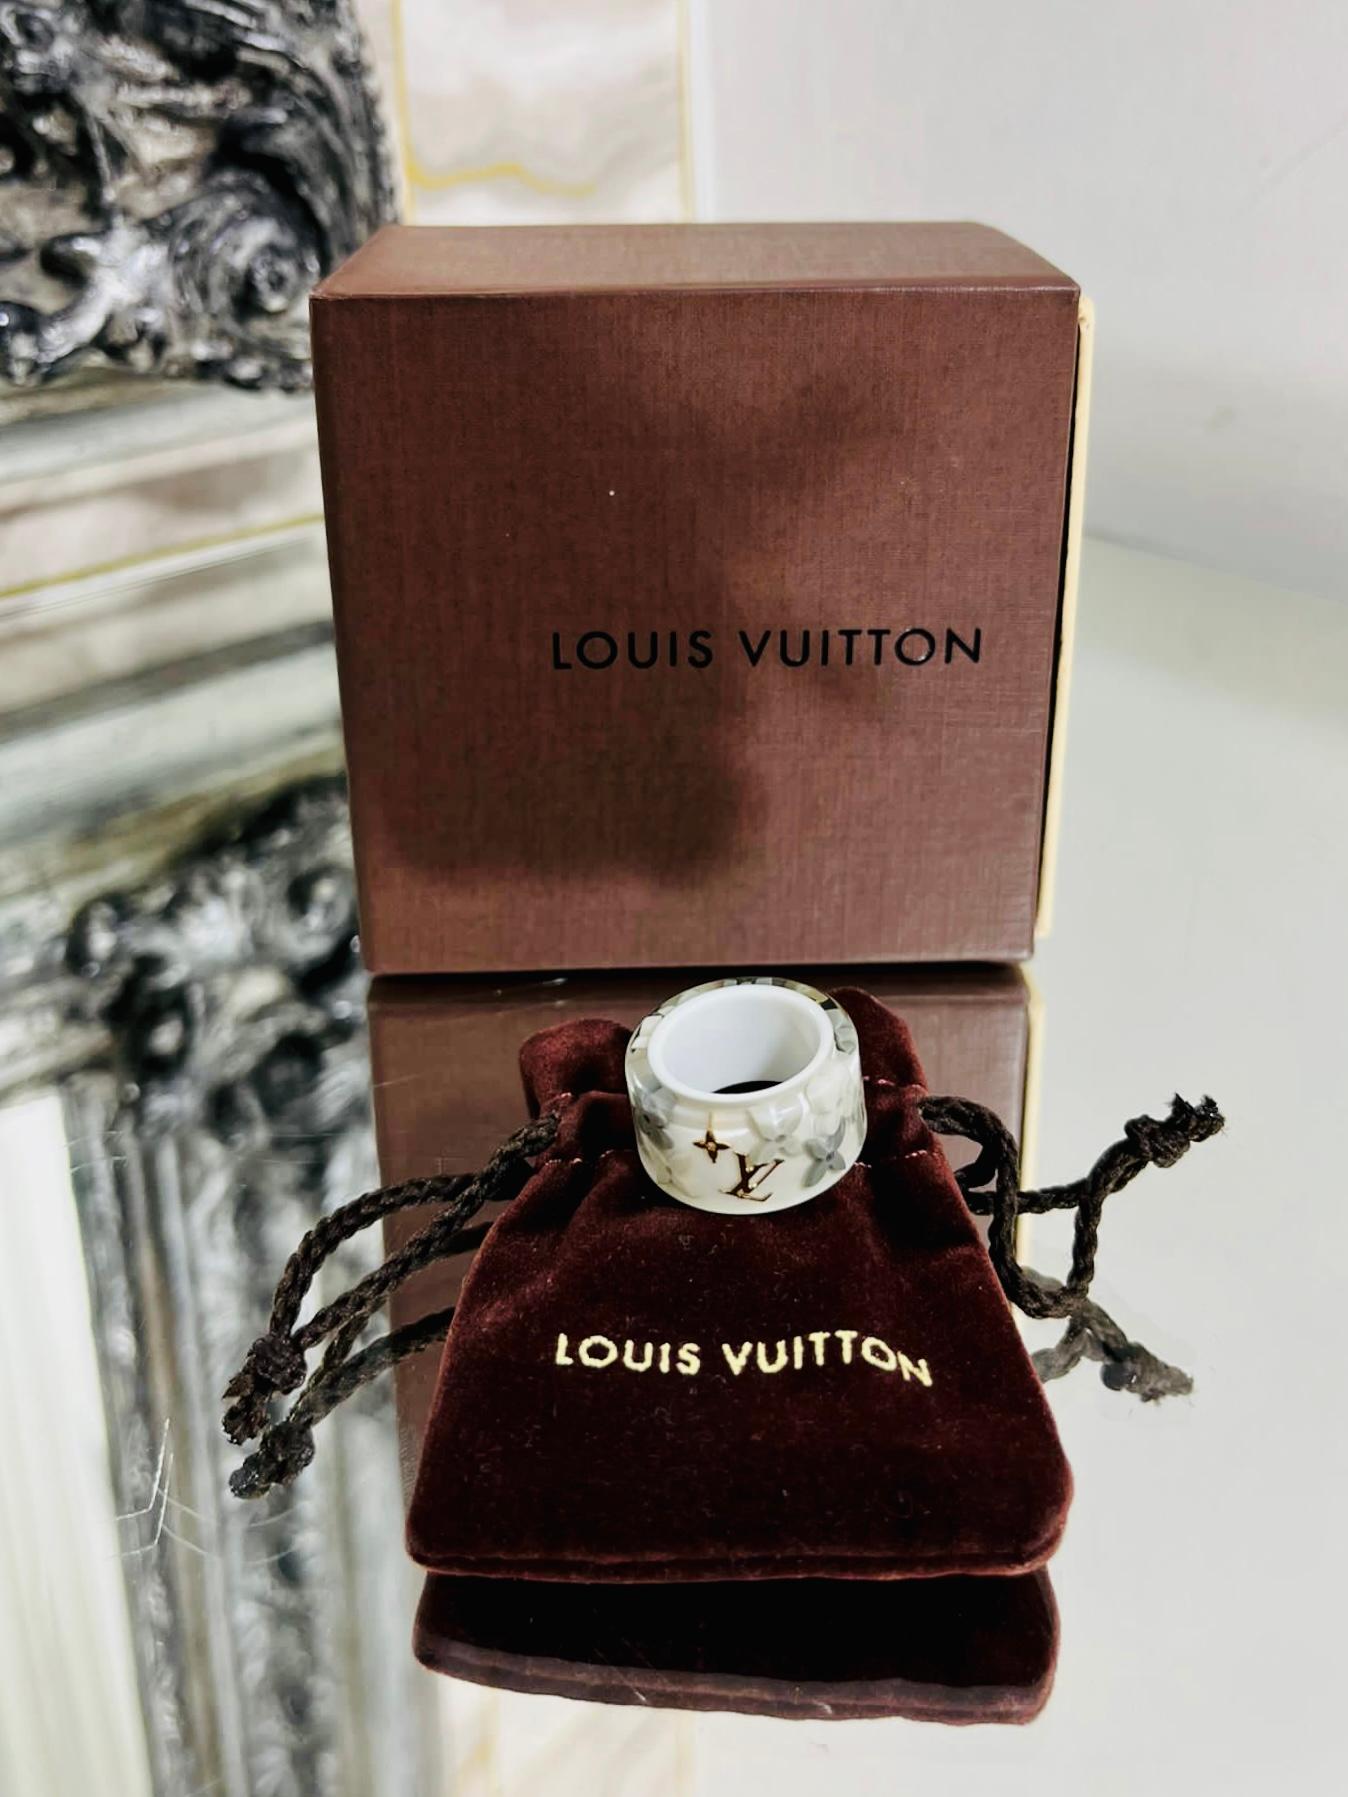 Louis Vuitton Inclusion Lucite 'LV' Logo Ring 

Clear acrylic/Lucite ring with gold 'LV' logos, grey and gold iconic floral patterns

set on an ivory plastic background.

Size - S

Condition - Very Good

Composition - Plastic

Comes With - Original 